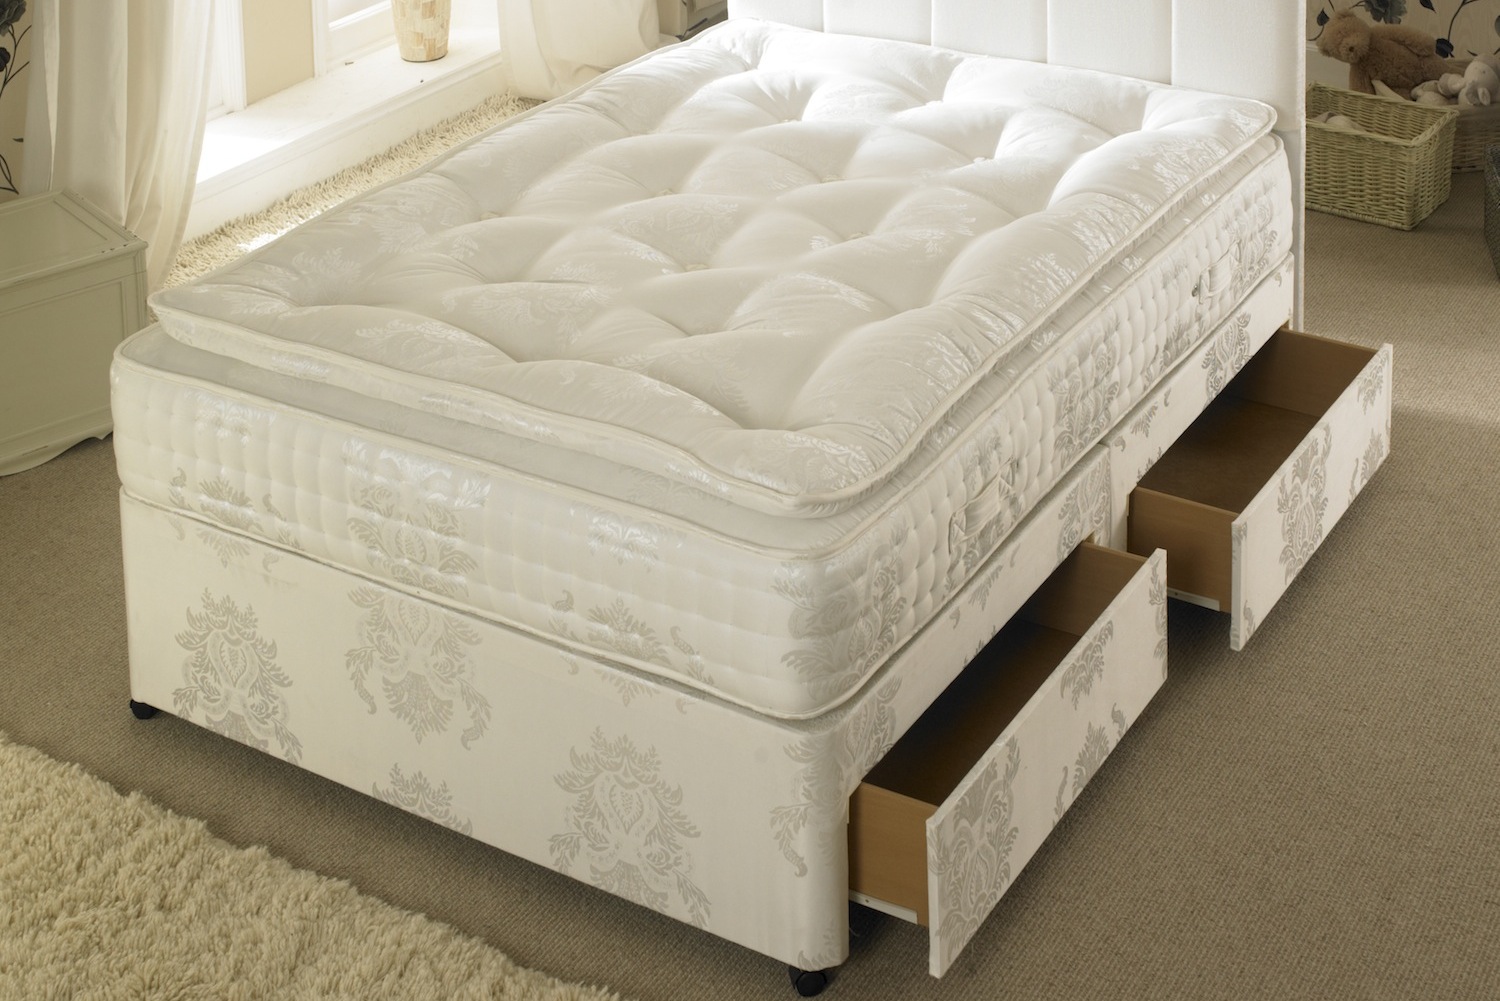 Joseph VIP 3000 Pillow Top Divan Bed-Double-2 Drawers Either Side